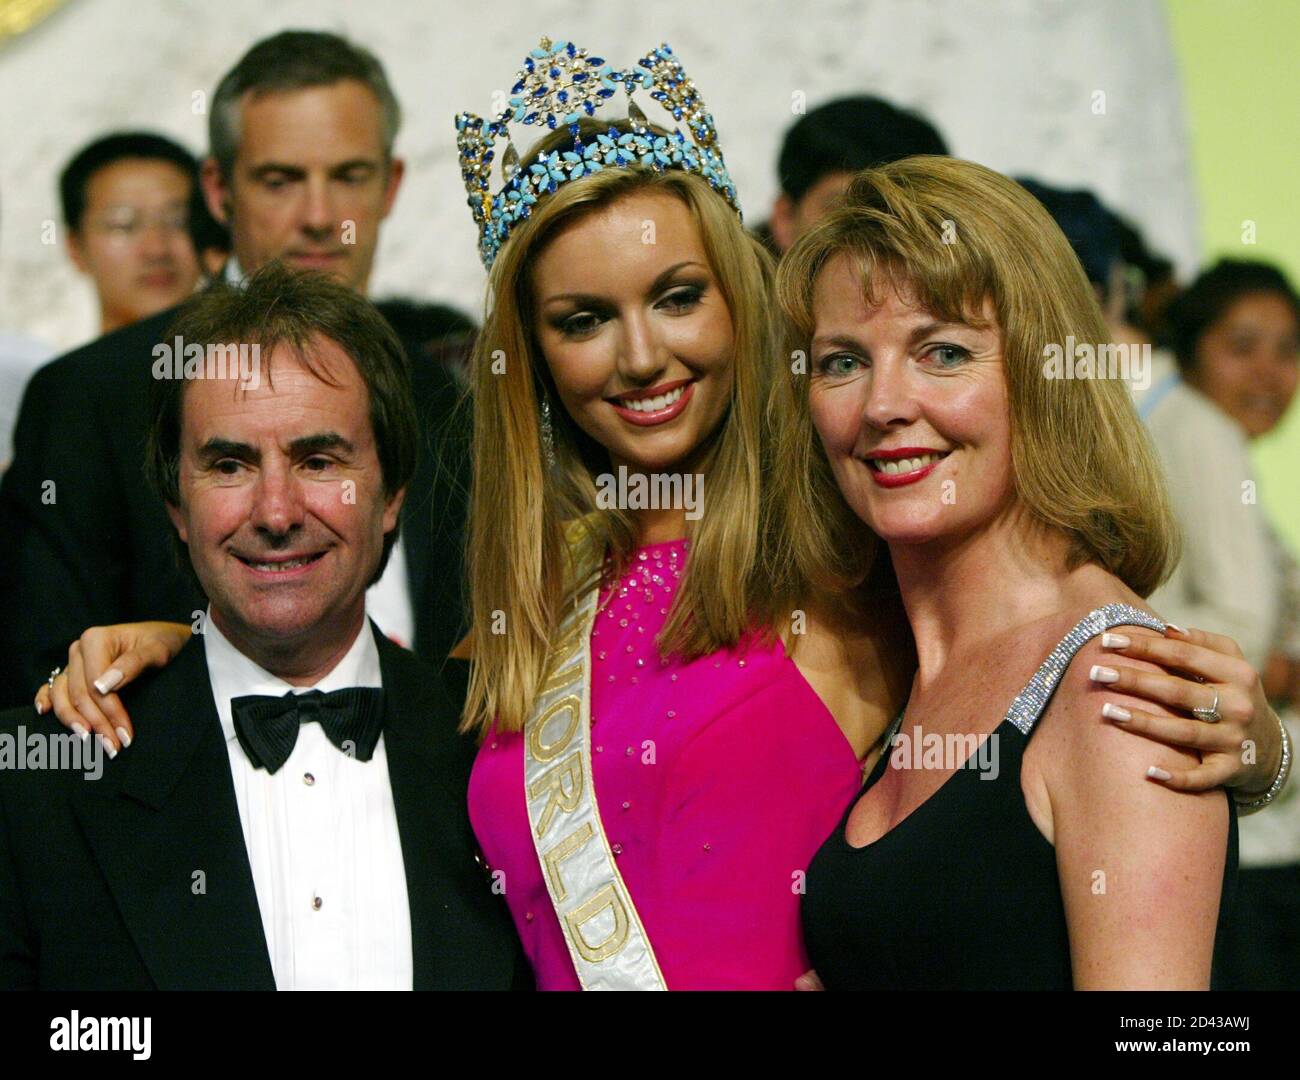 Miss Ireland Rosanna Davison (C) poses with her parents singer Chris de Burgh (L) and wife Diane after being crowned Miss World 2003 in Sanya, in China's tropical island of Hainan, December 6, 2003. Stock Photo